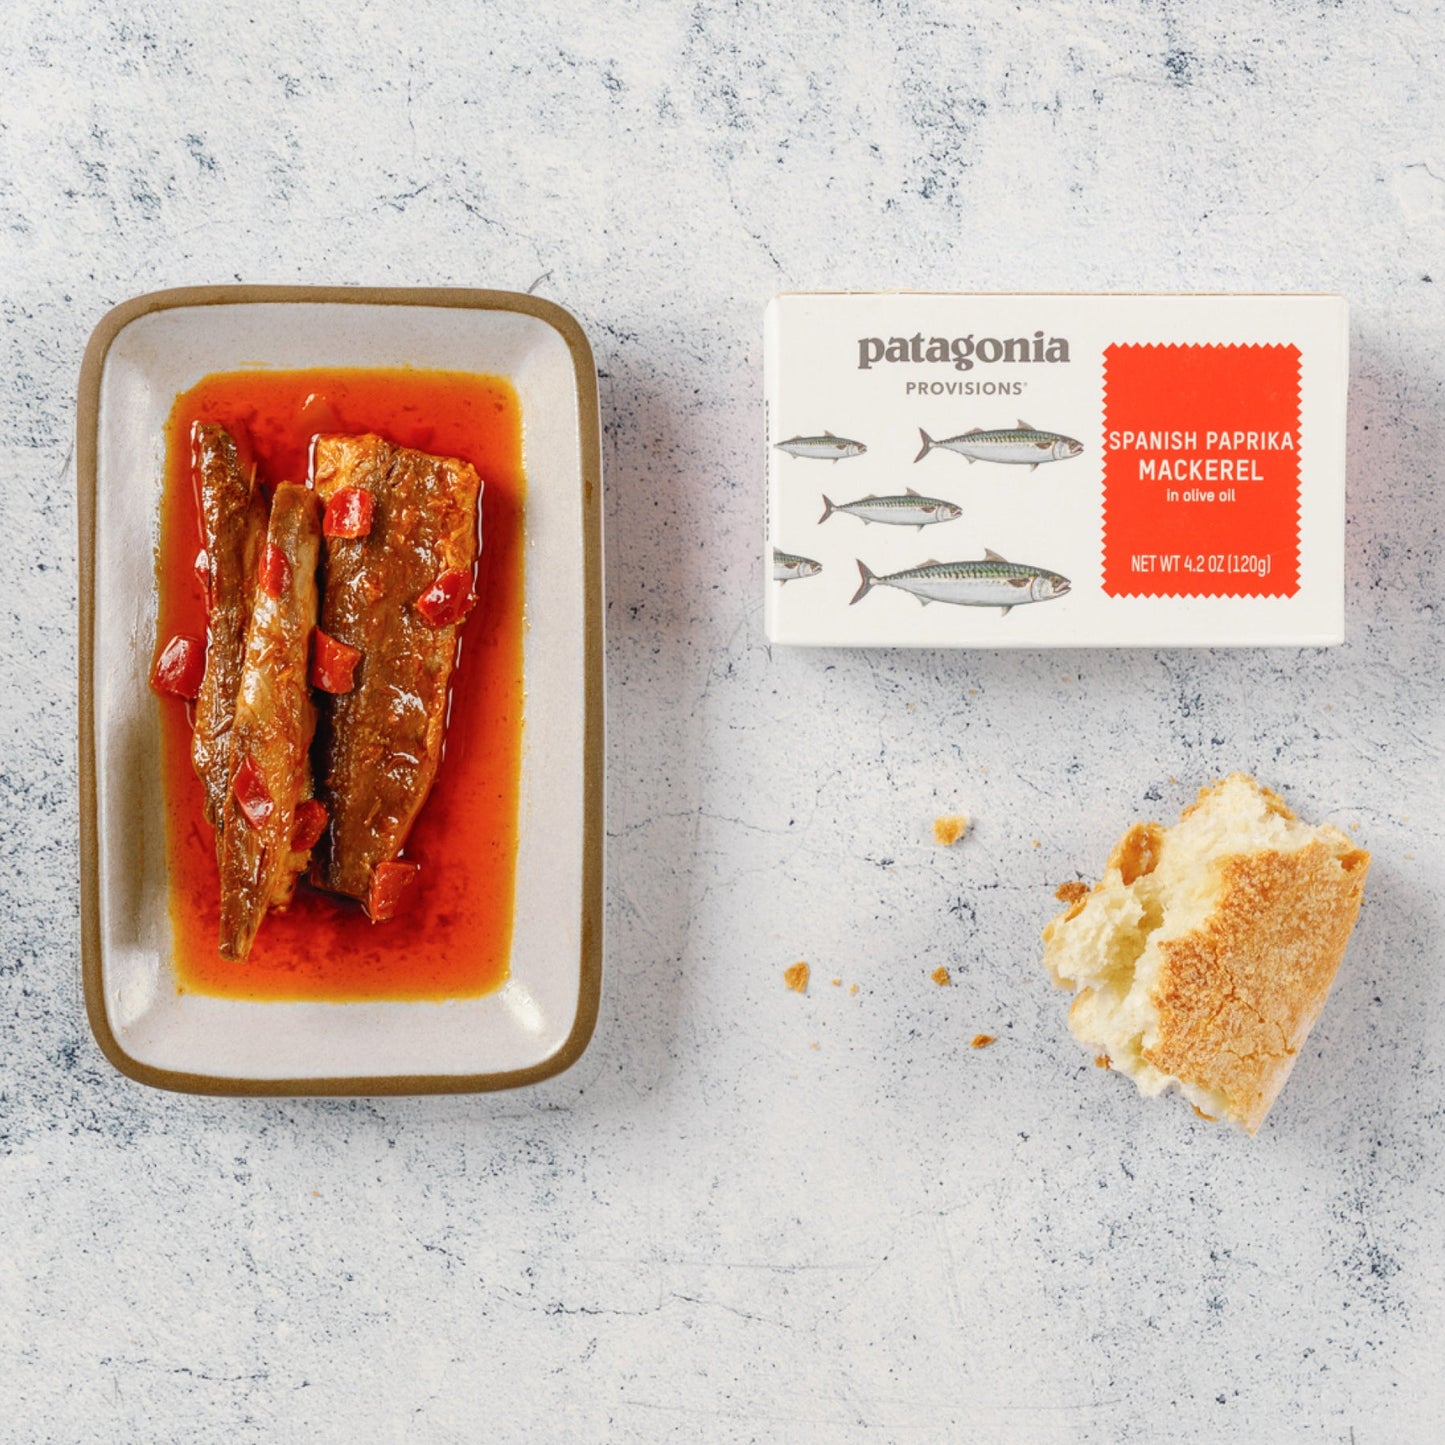 Load image into Gallery viewer, Spanish Paprika Mackerel, Patagonia Provisions, Spain
